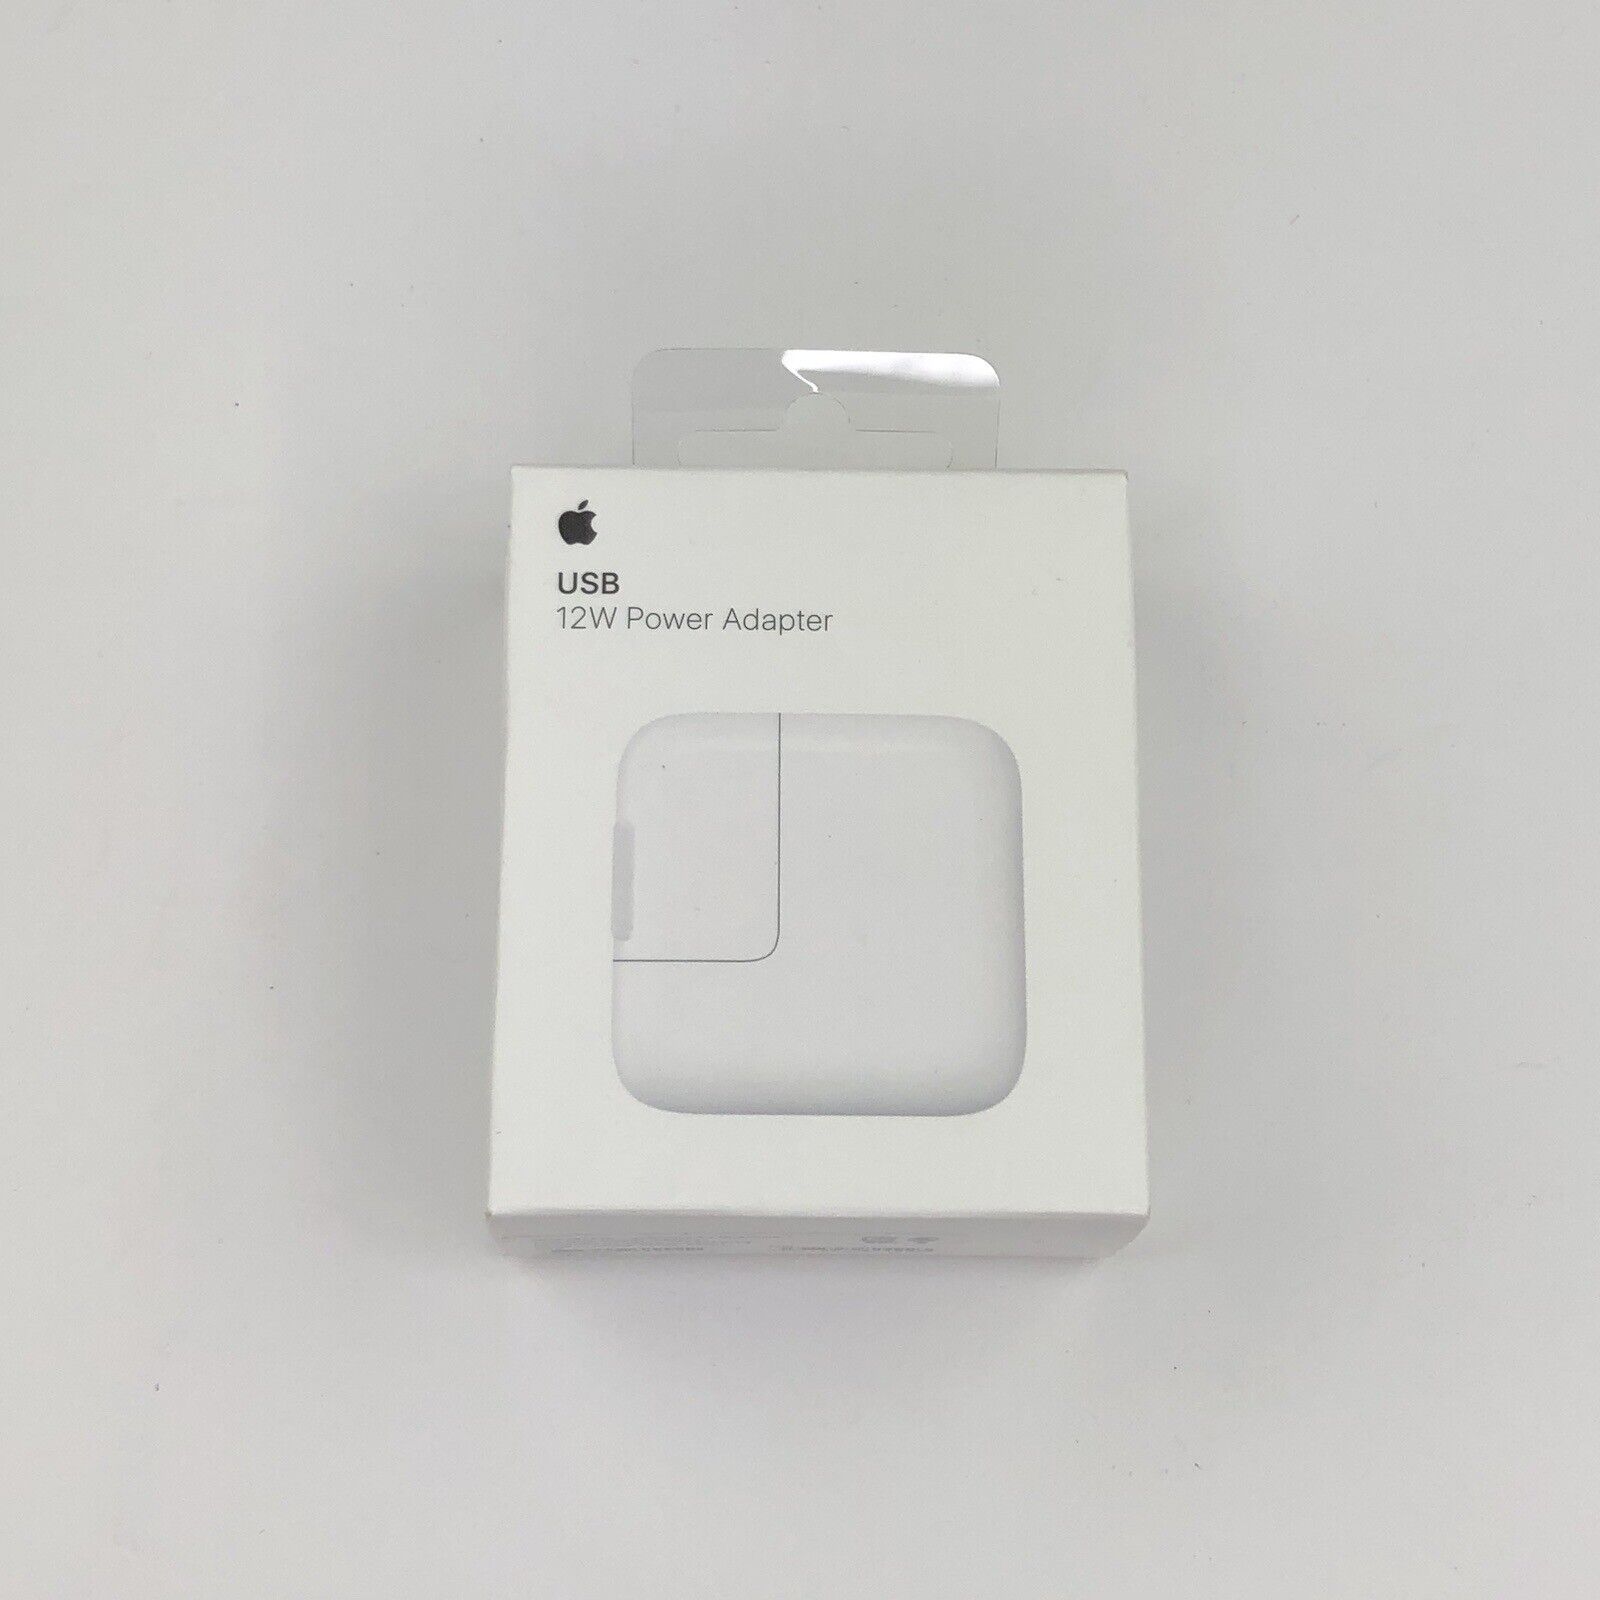 Genuine Original Apple 12W USB Power Adapter Charger (A1401) MD836LL/A NEW